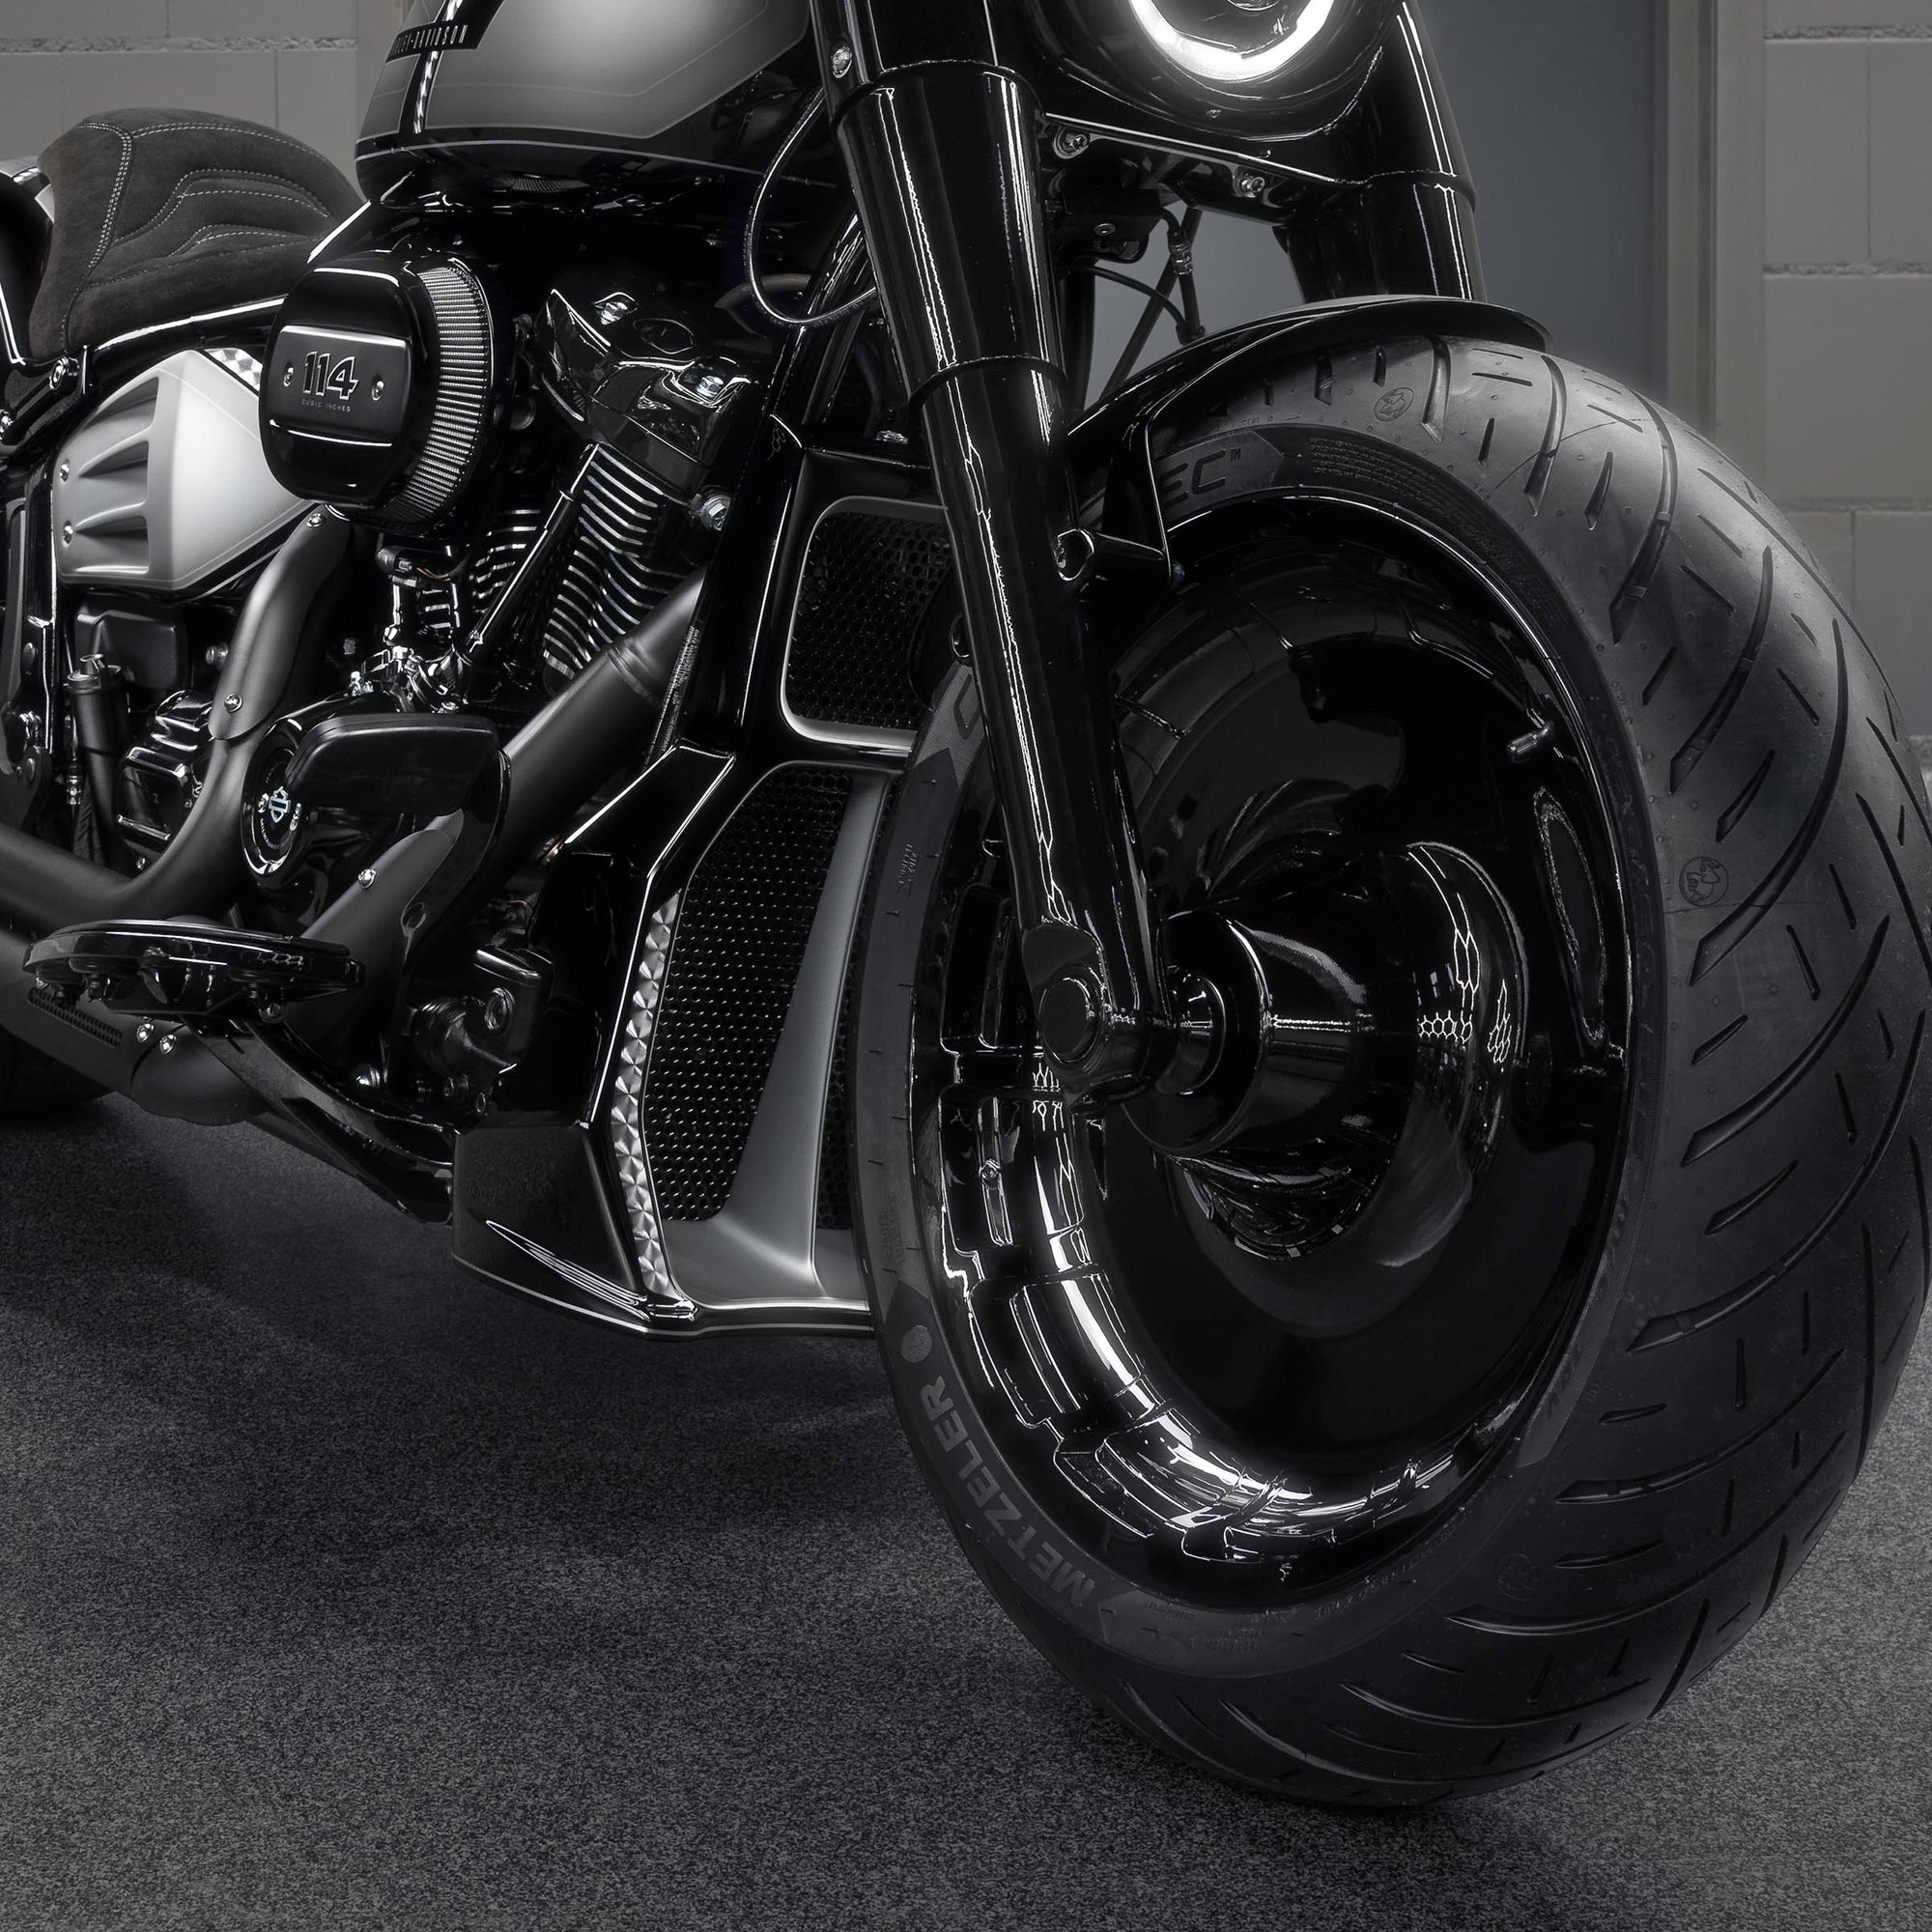 Zoomed Harley Davidson motorcycle with Killer Custom parts from the front in a modern bike shop